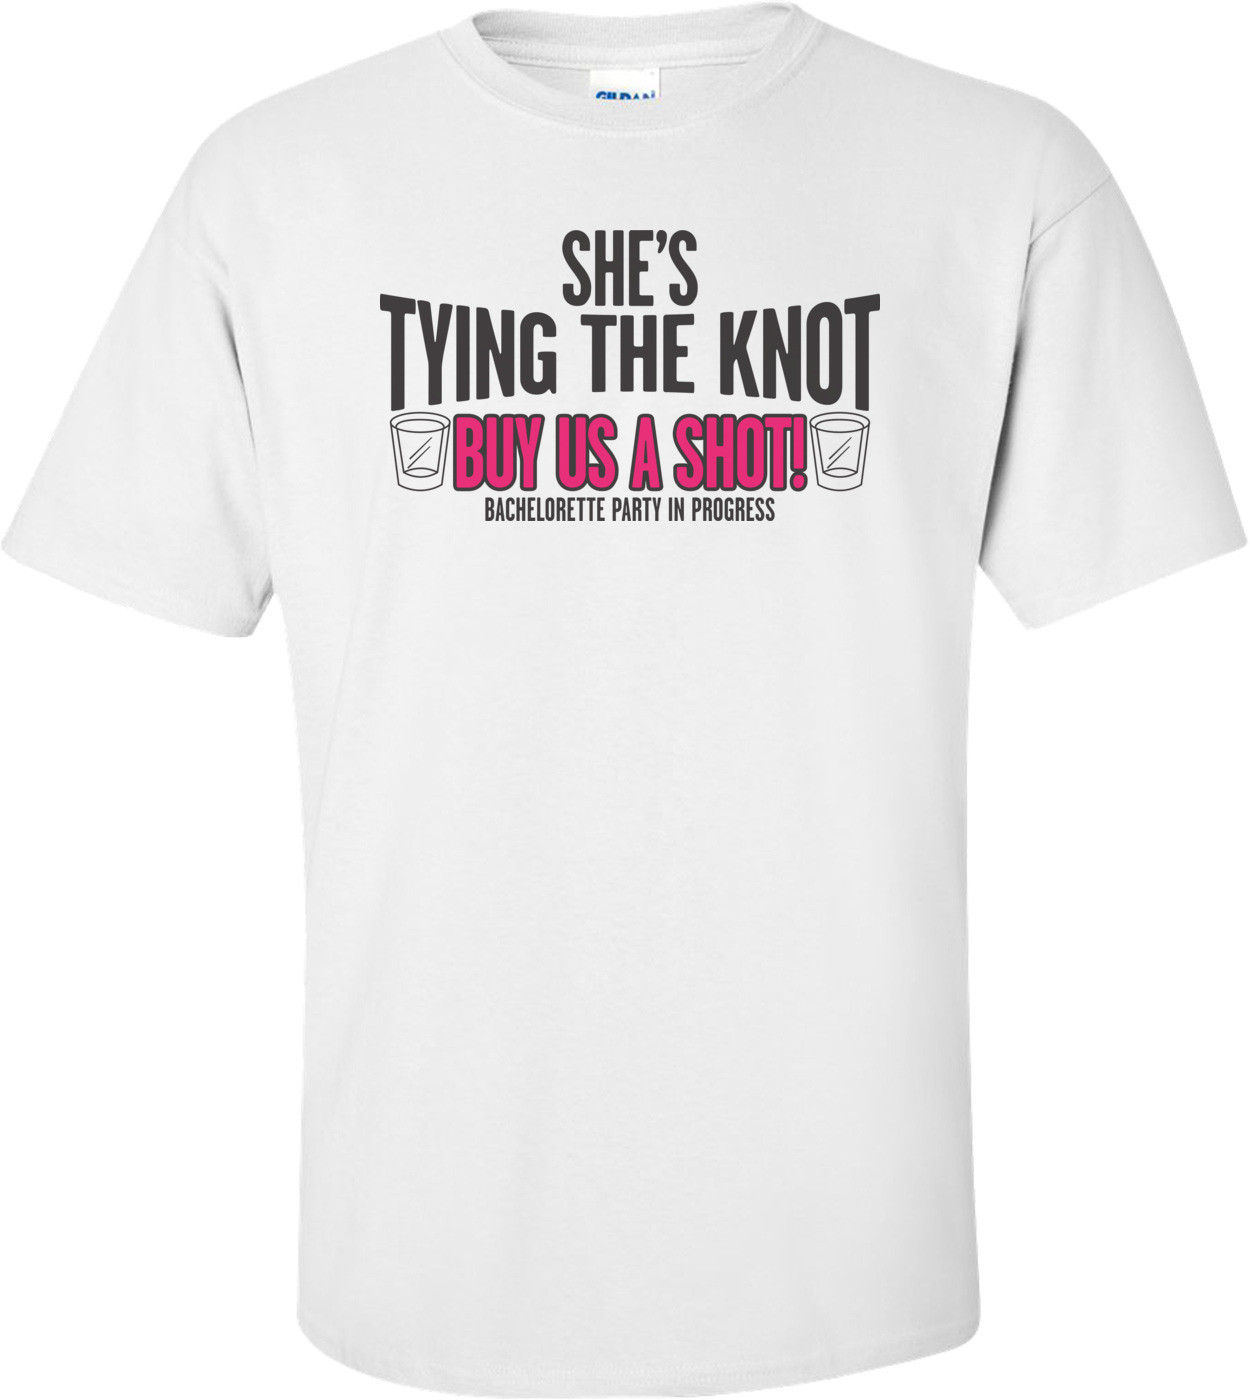 Shes Tying The Knot Buy Us A Shot T-shirt